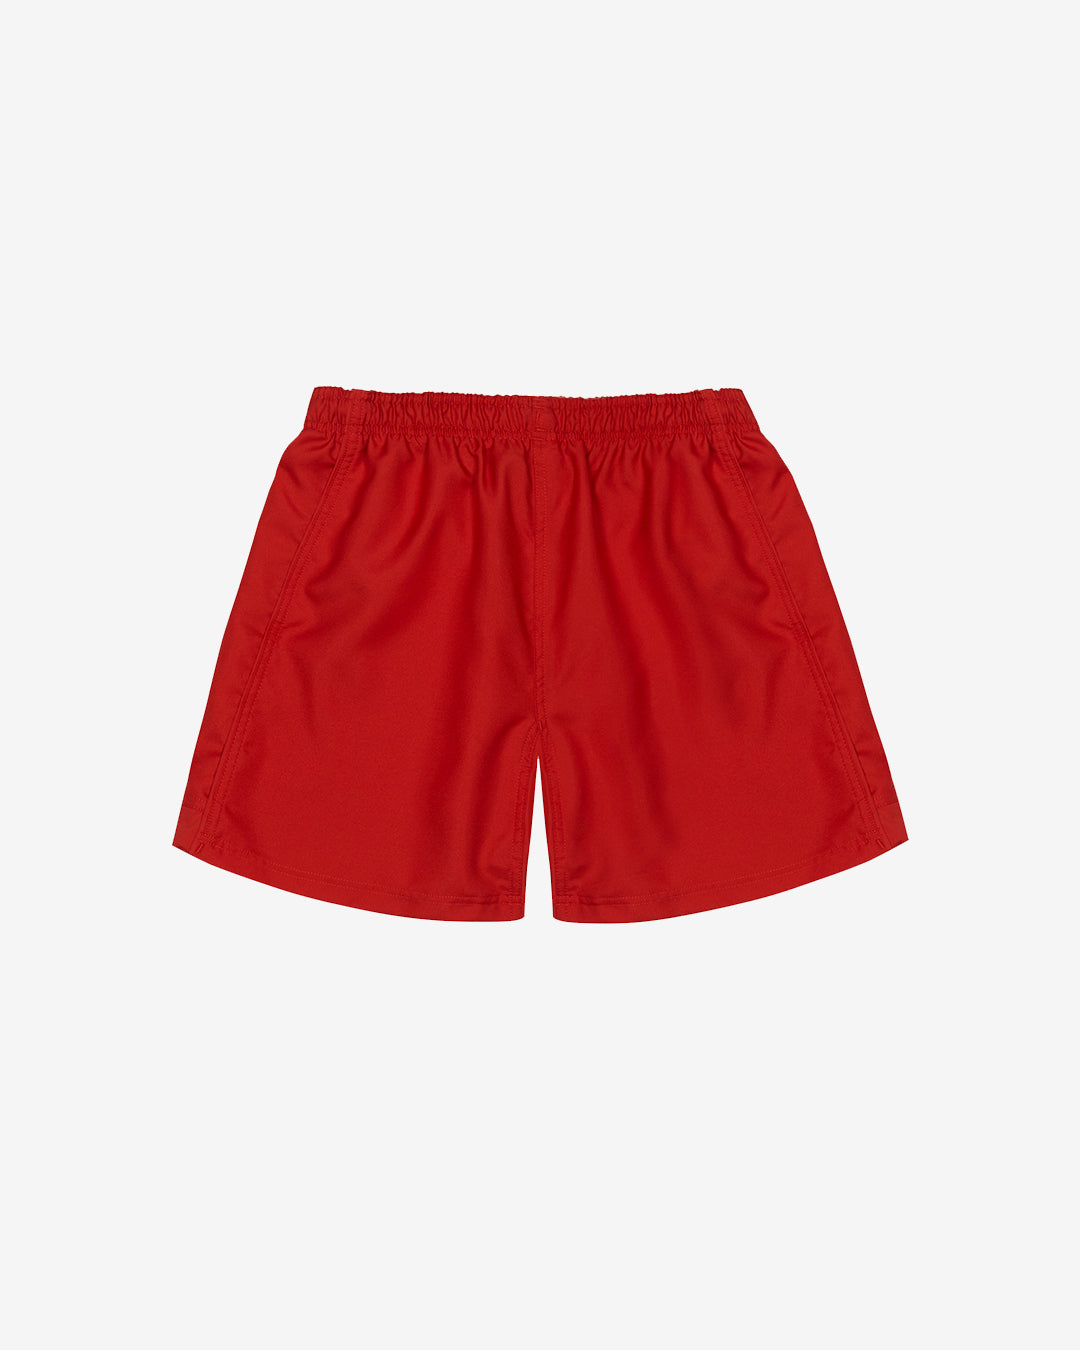 EP:0119 - Rugby Shorts - Red